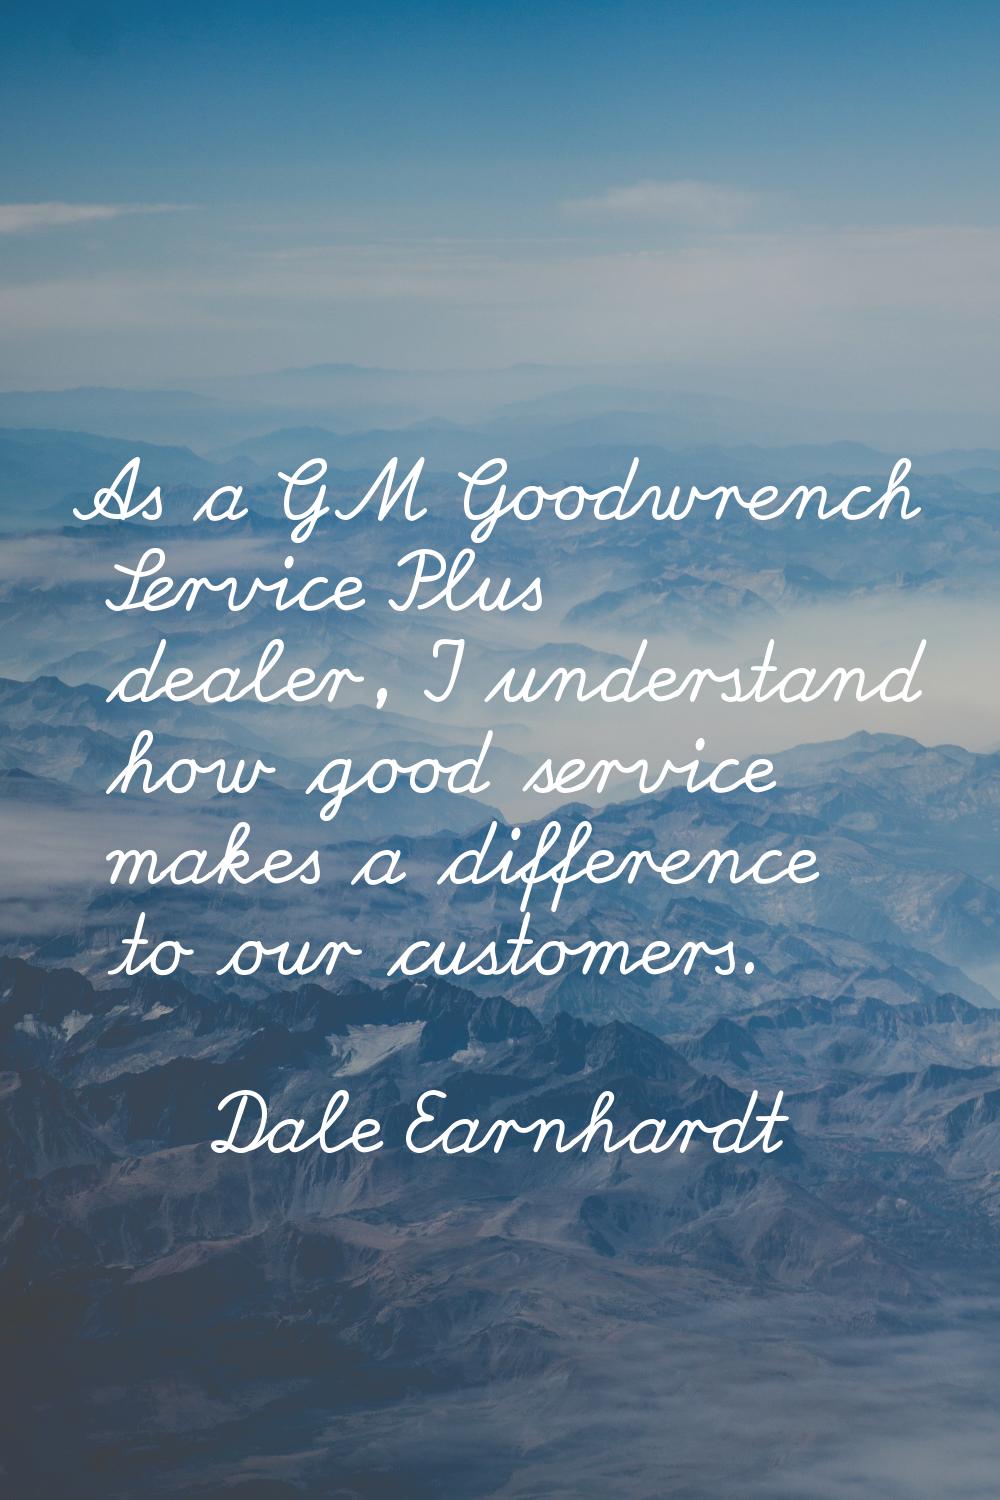 As a GM Goodwrench Service Plus dealer, I understand how good service makes a difference to our cus